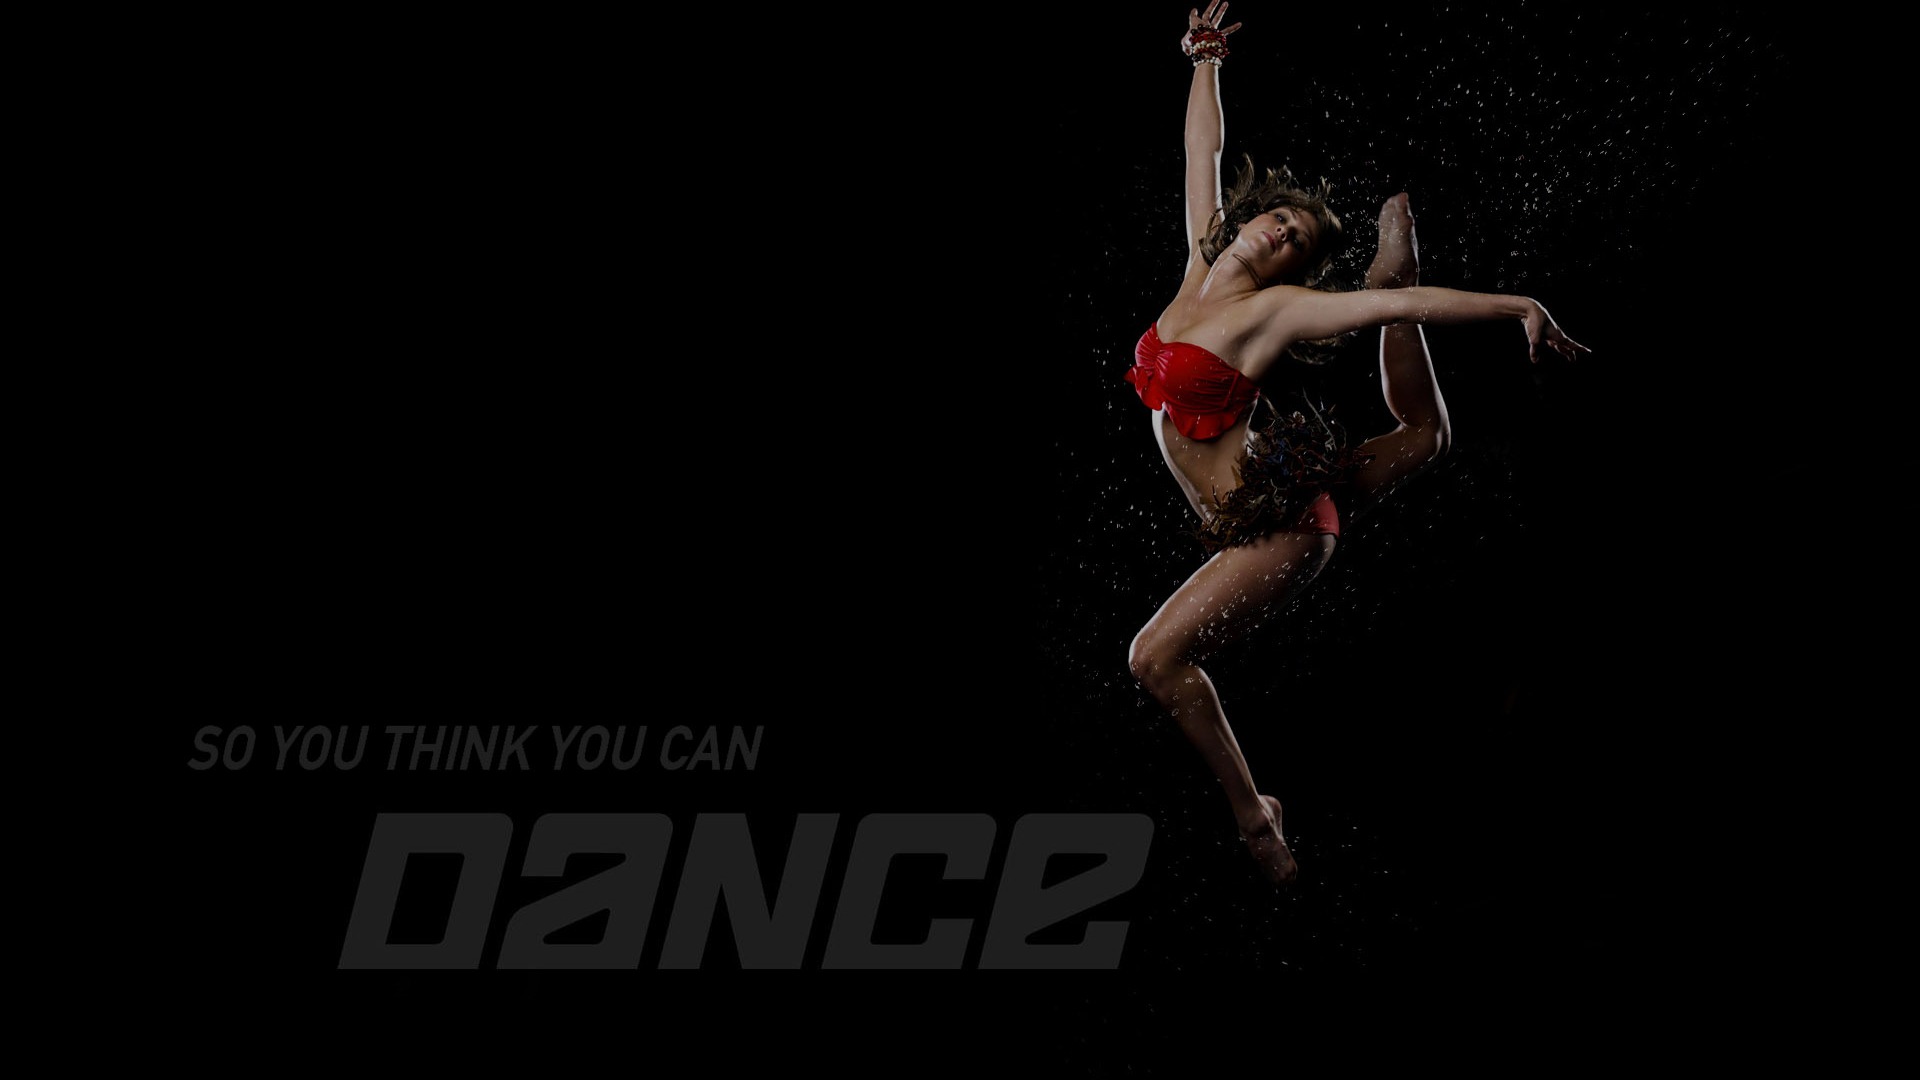 So You Think You Can Dance 舞林争霸 壁纸(二)13 - 1920x1080